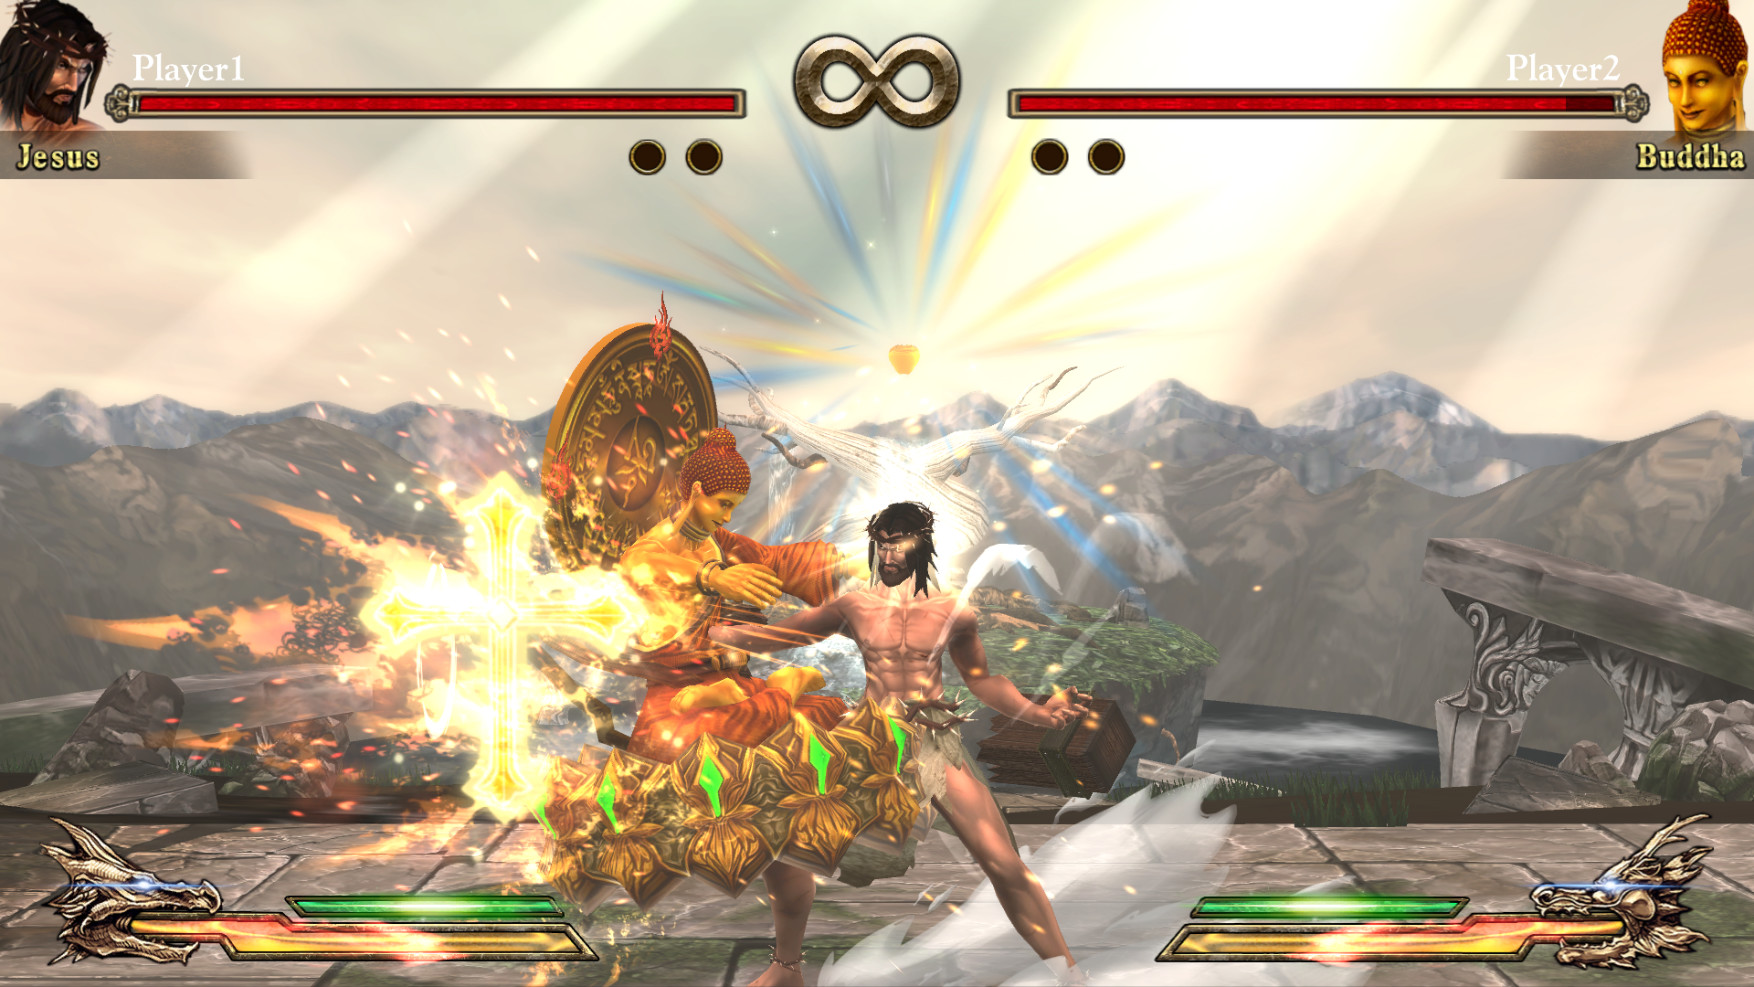 Fight of Gods Free Download